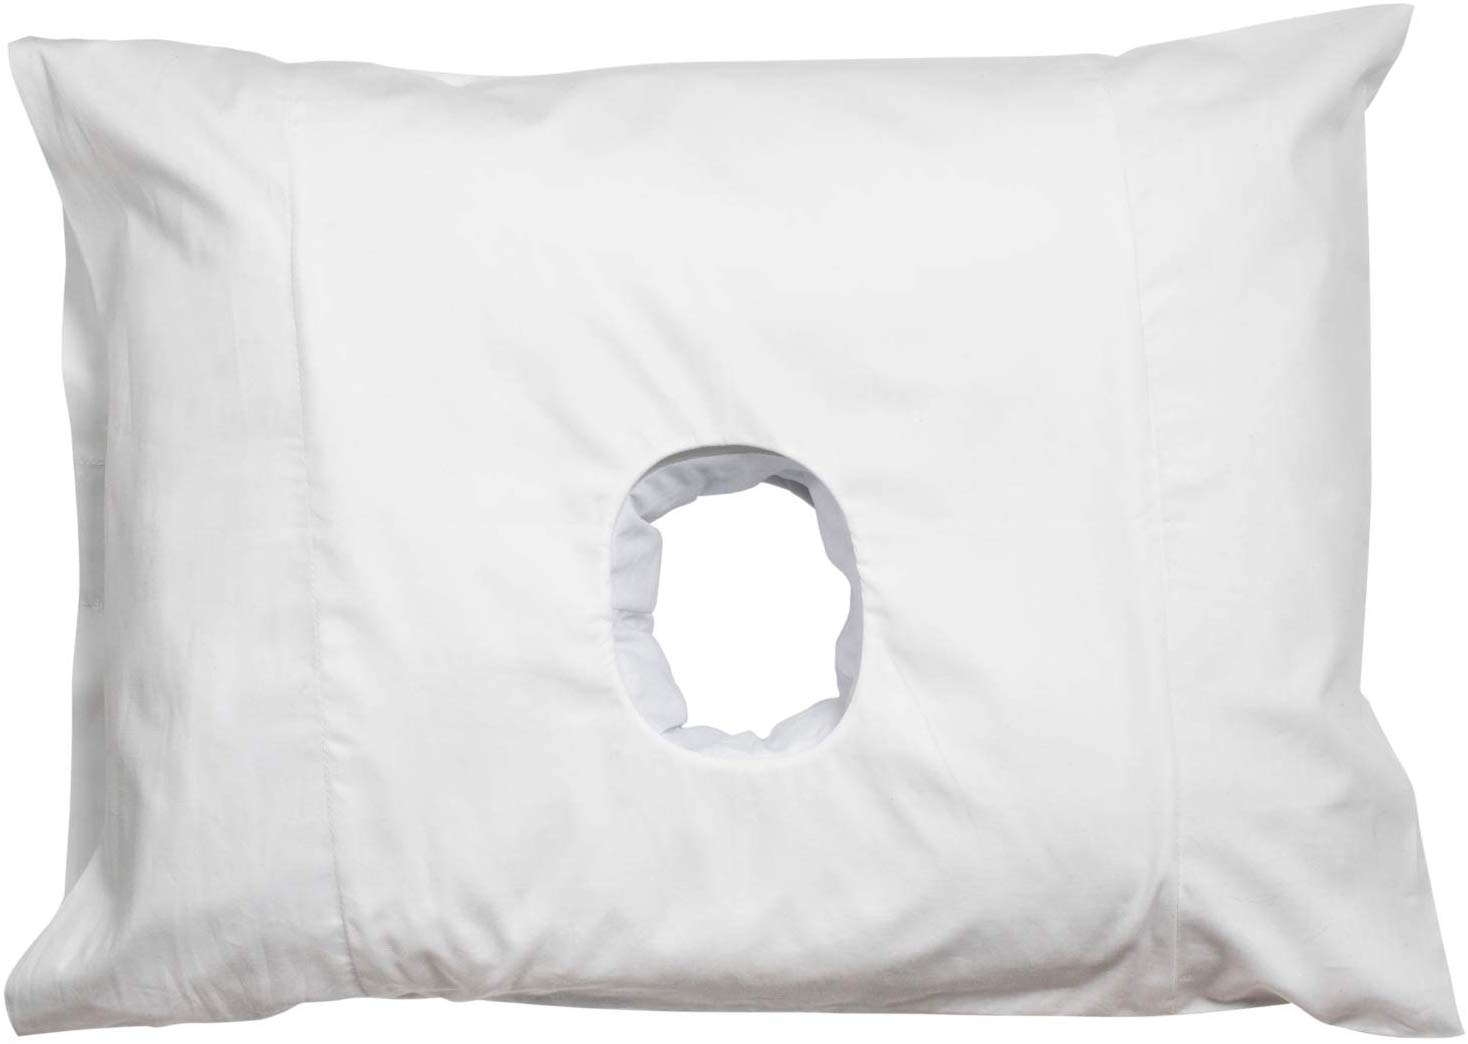 Functional Specifications of Qualitative Ear Pillows